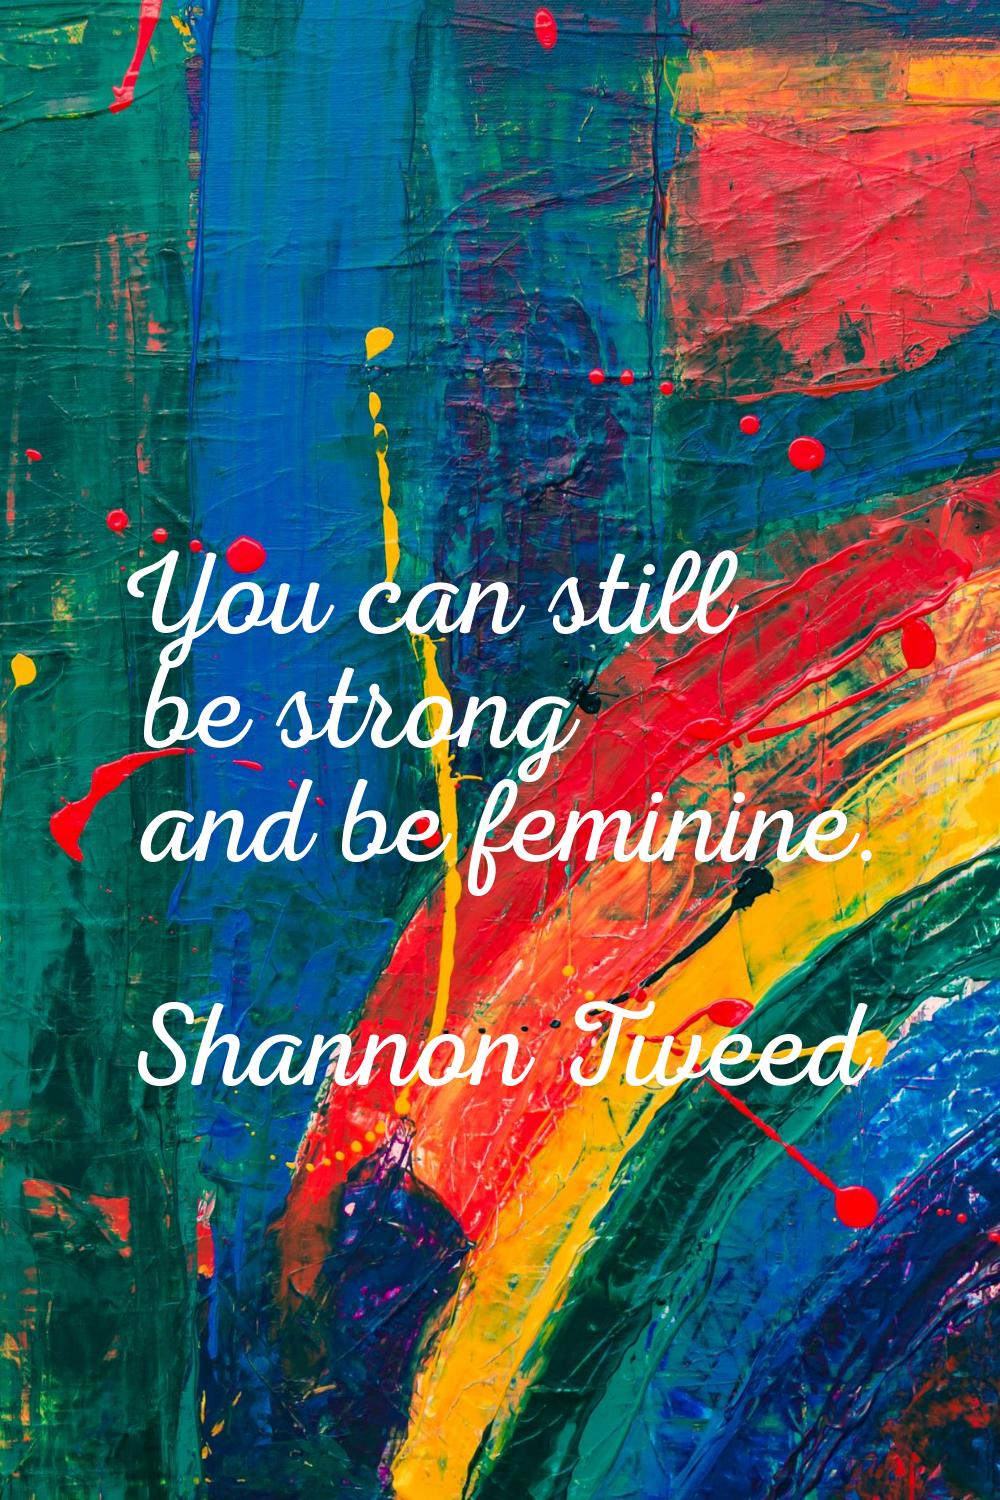 You can still be strong and be feminine.